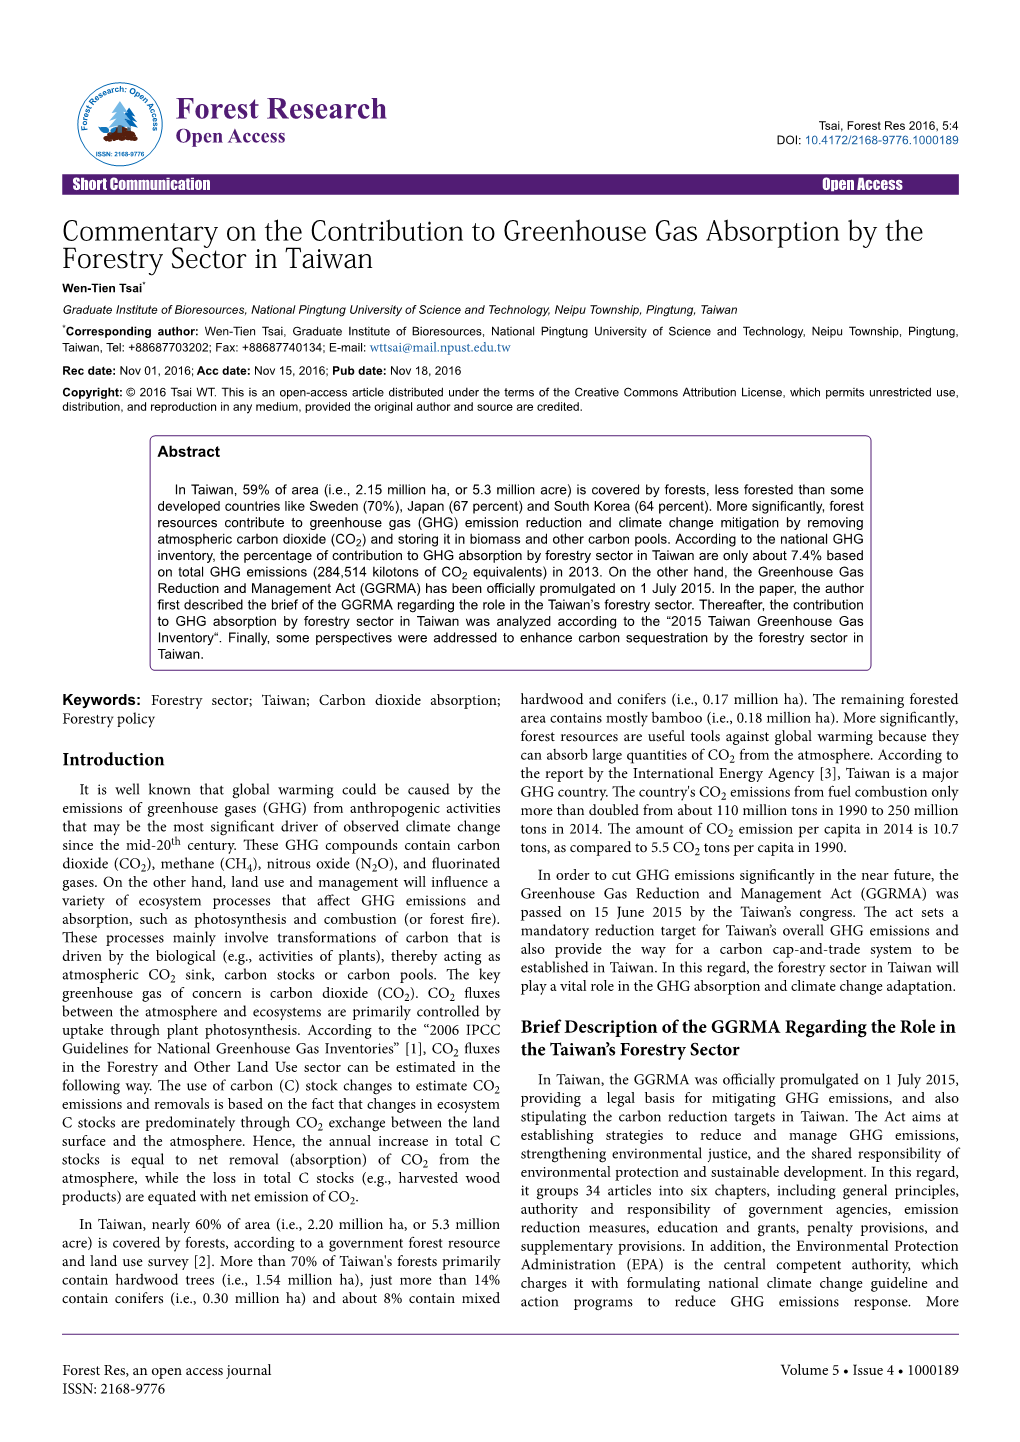 Commentary on the Contribution to Greenhouse Gas Absorption by The